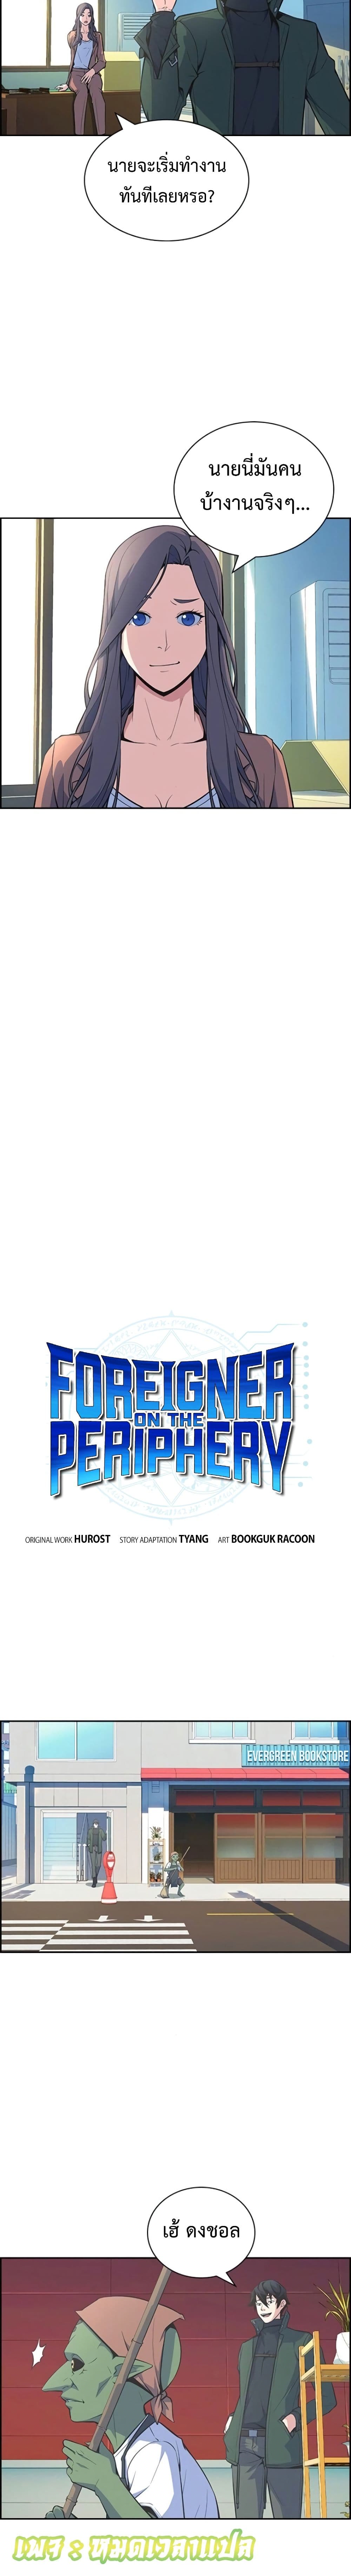 Foreigner on the Periphery 3 (7)